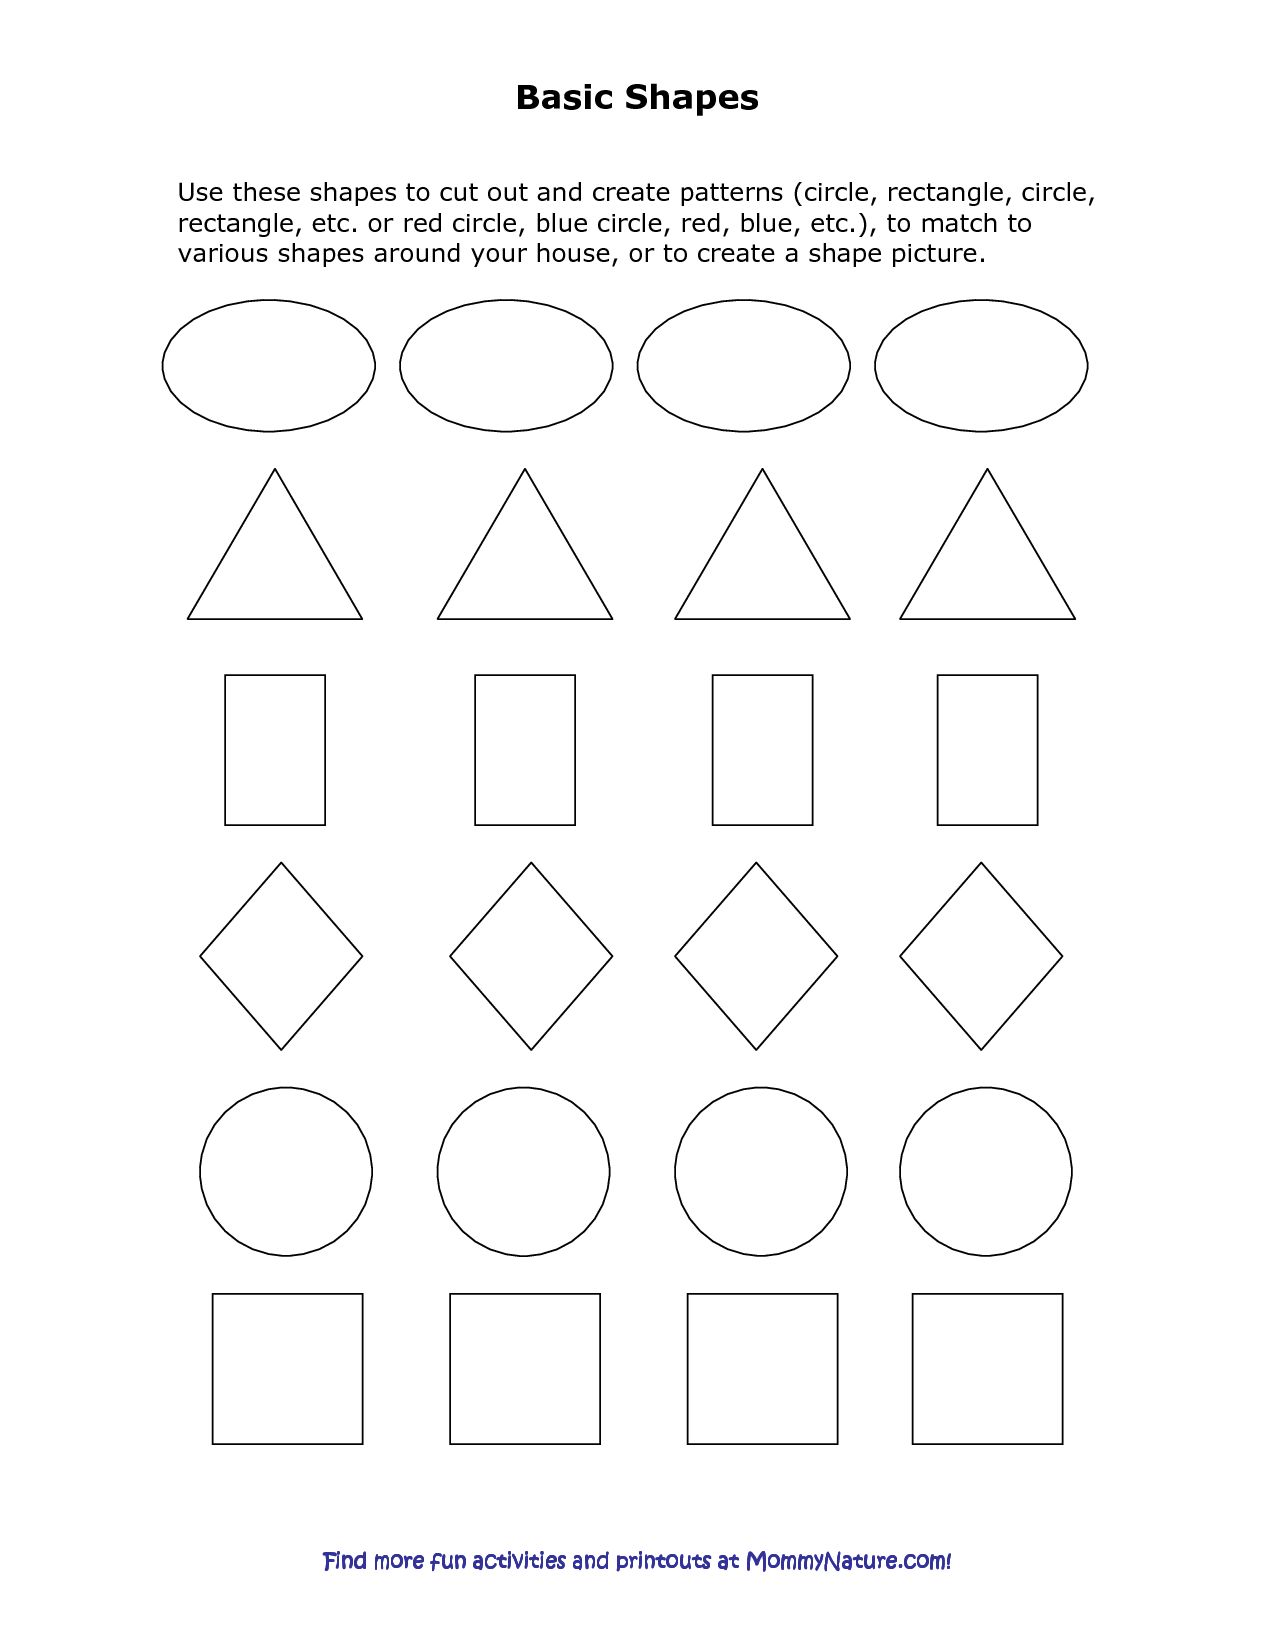 8 Best Images of Printable Shapes Cut Out Pattern - Printable Heart Cut